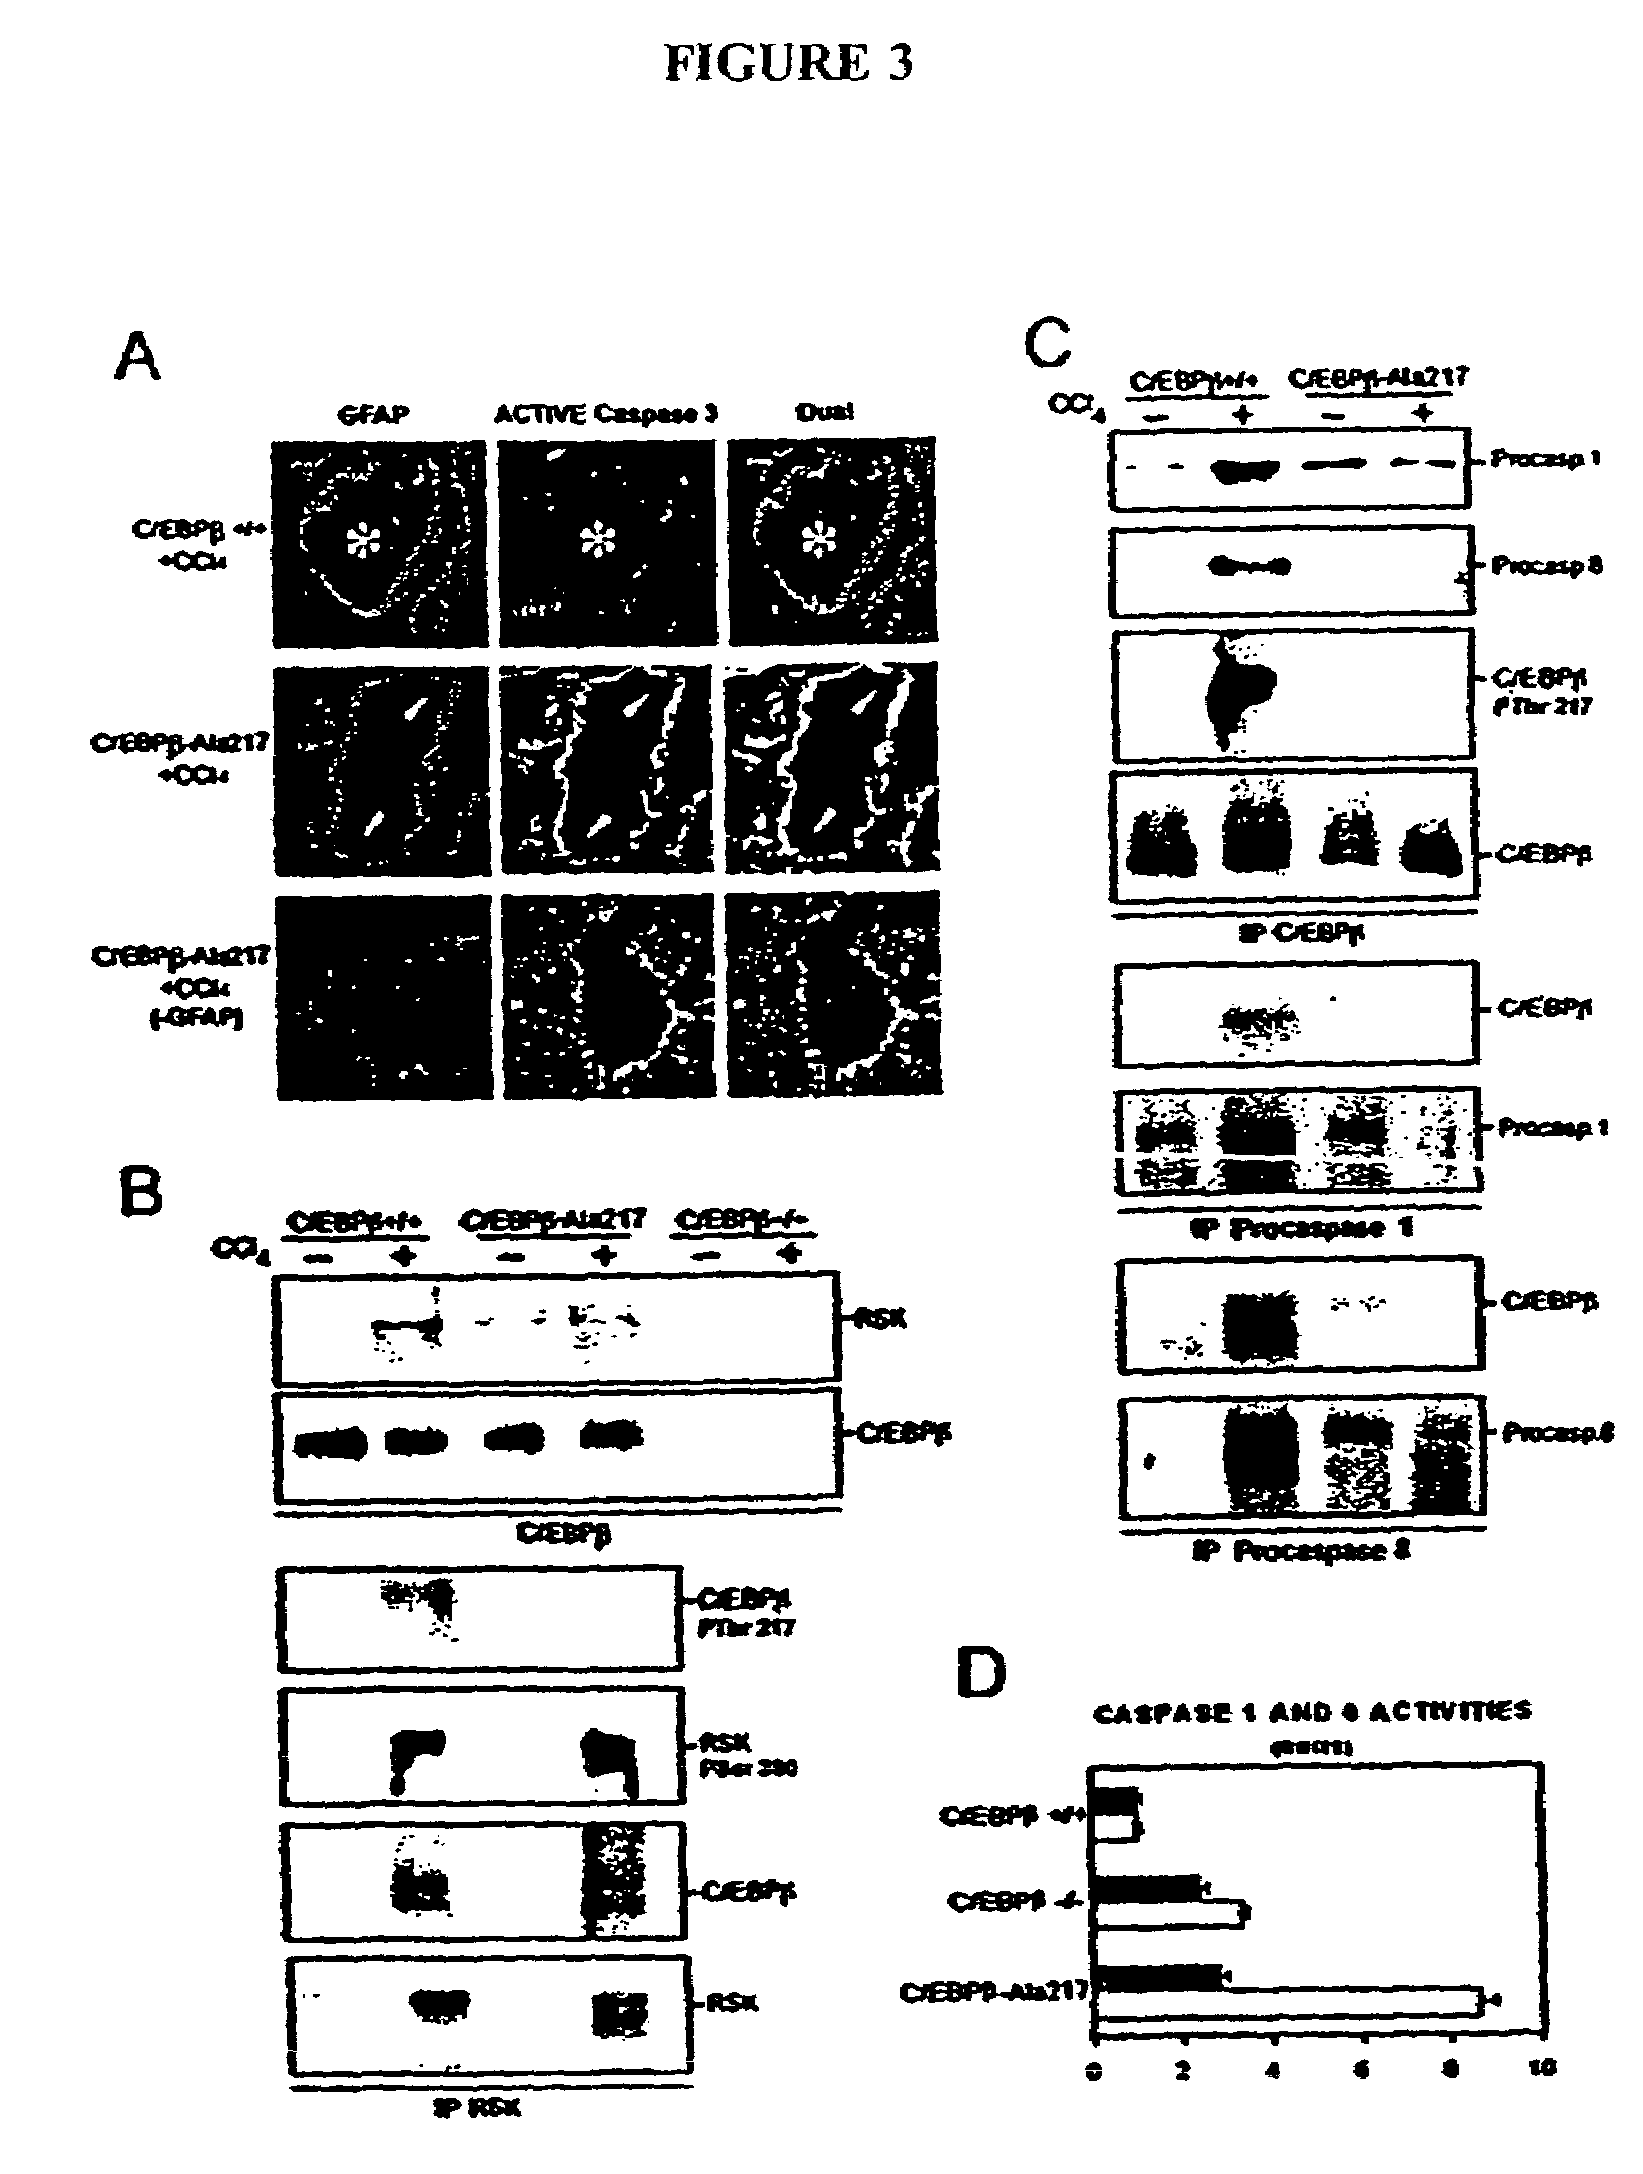 Treatment of disease by inducing cell apoptosis